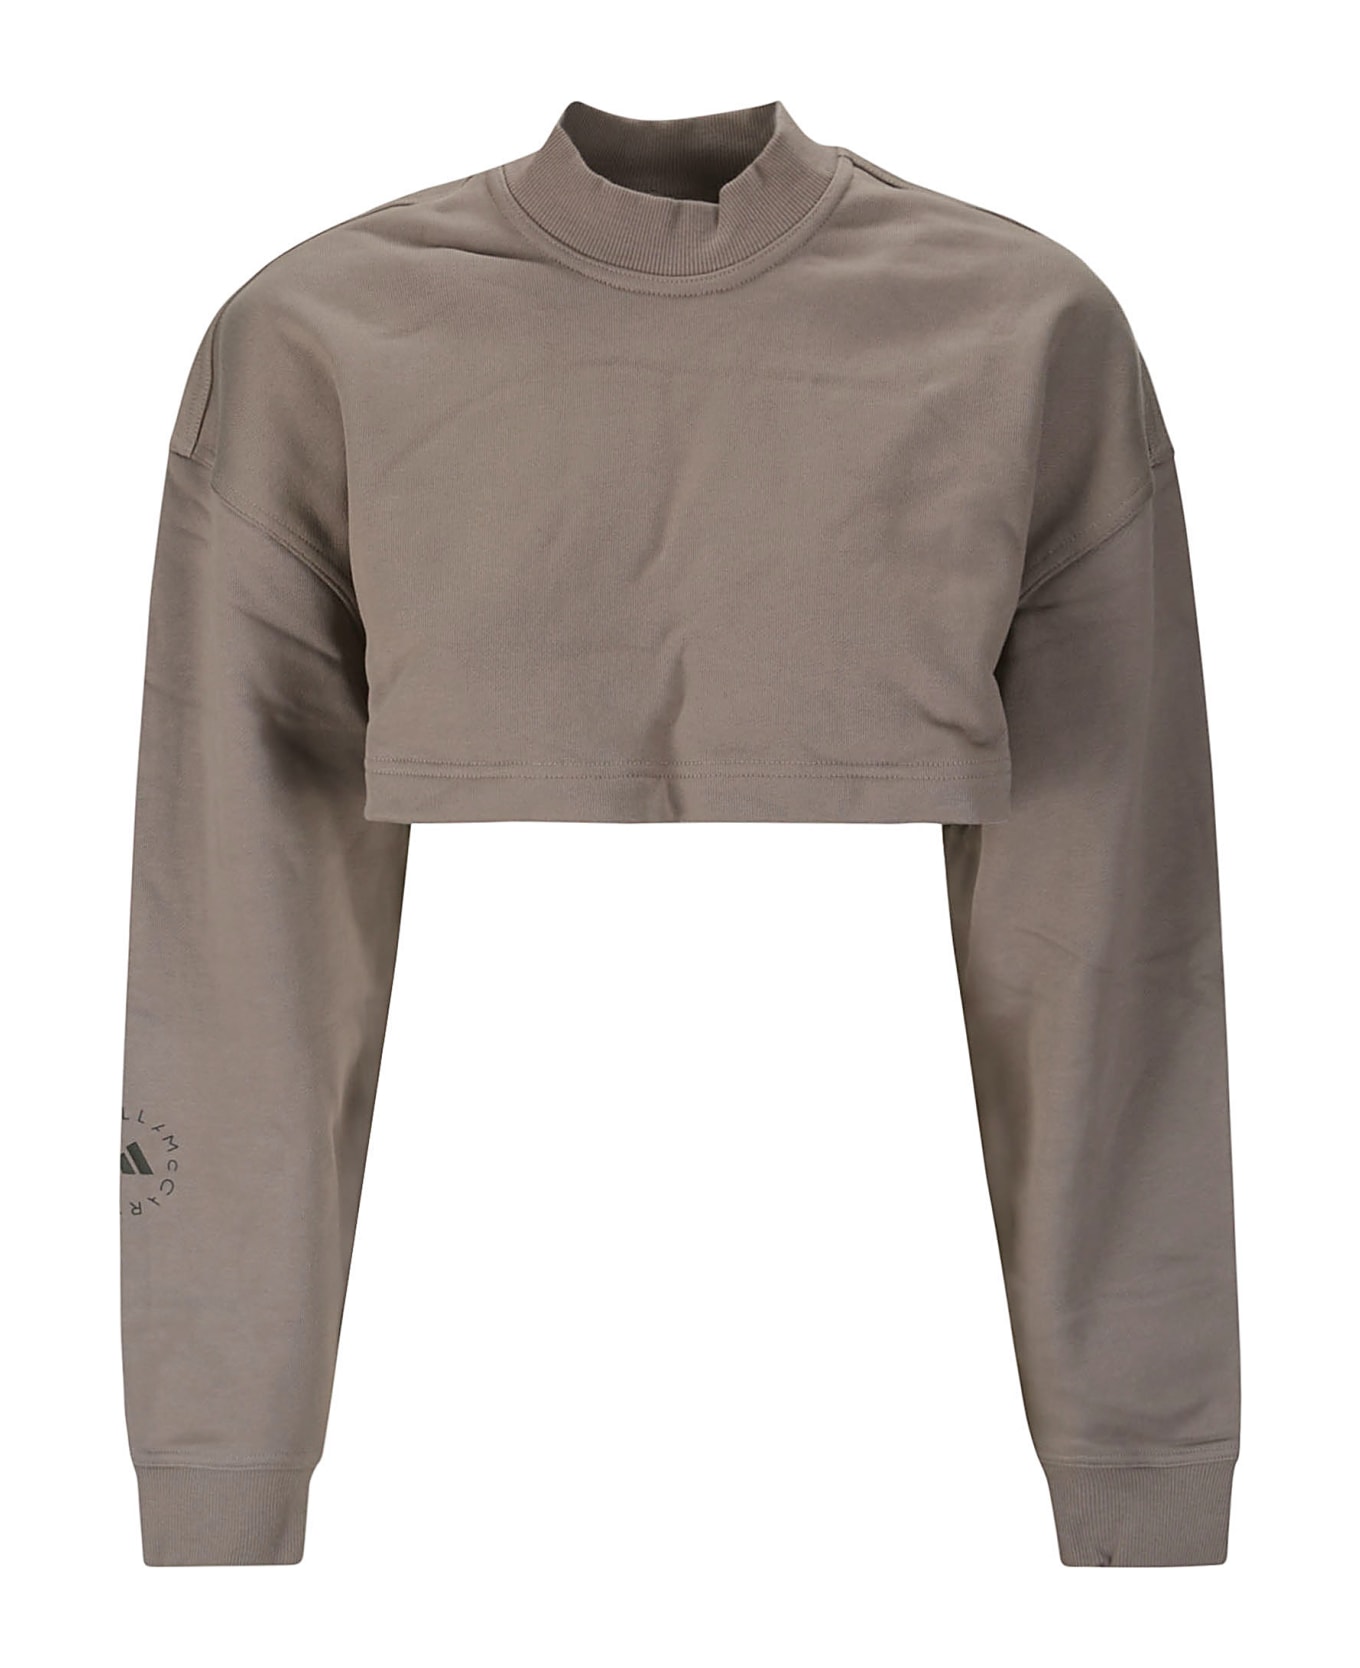 Adidas by Stella McCartney Truecasuals Cut Out Detailed Cropped Sweatshirt - TECH EARTH